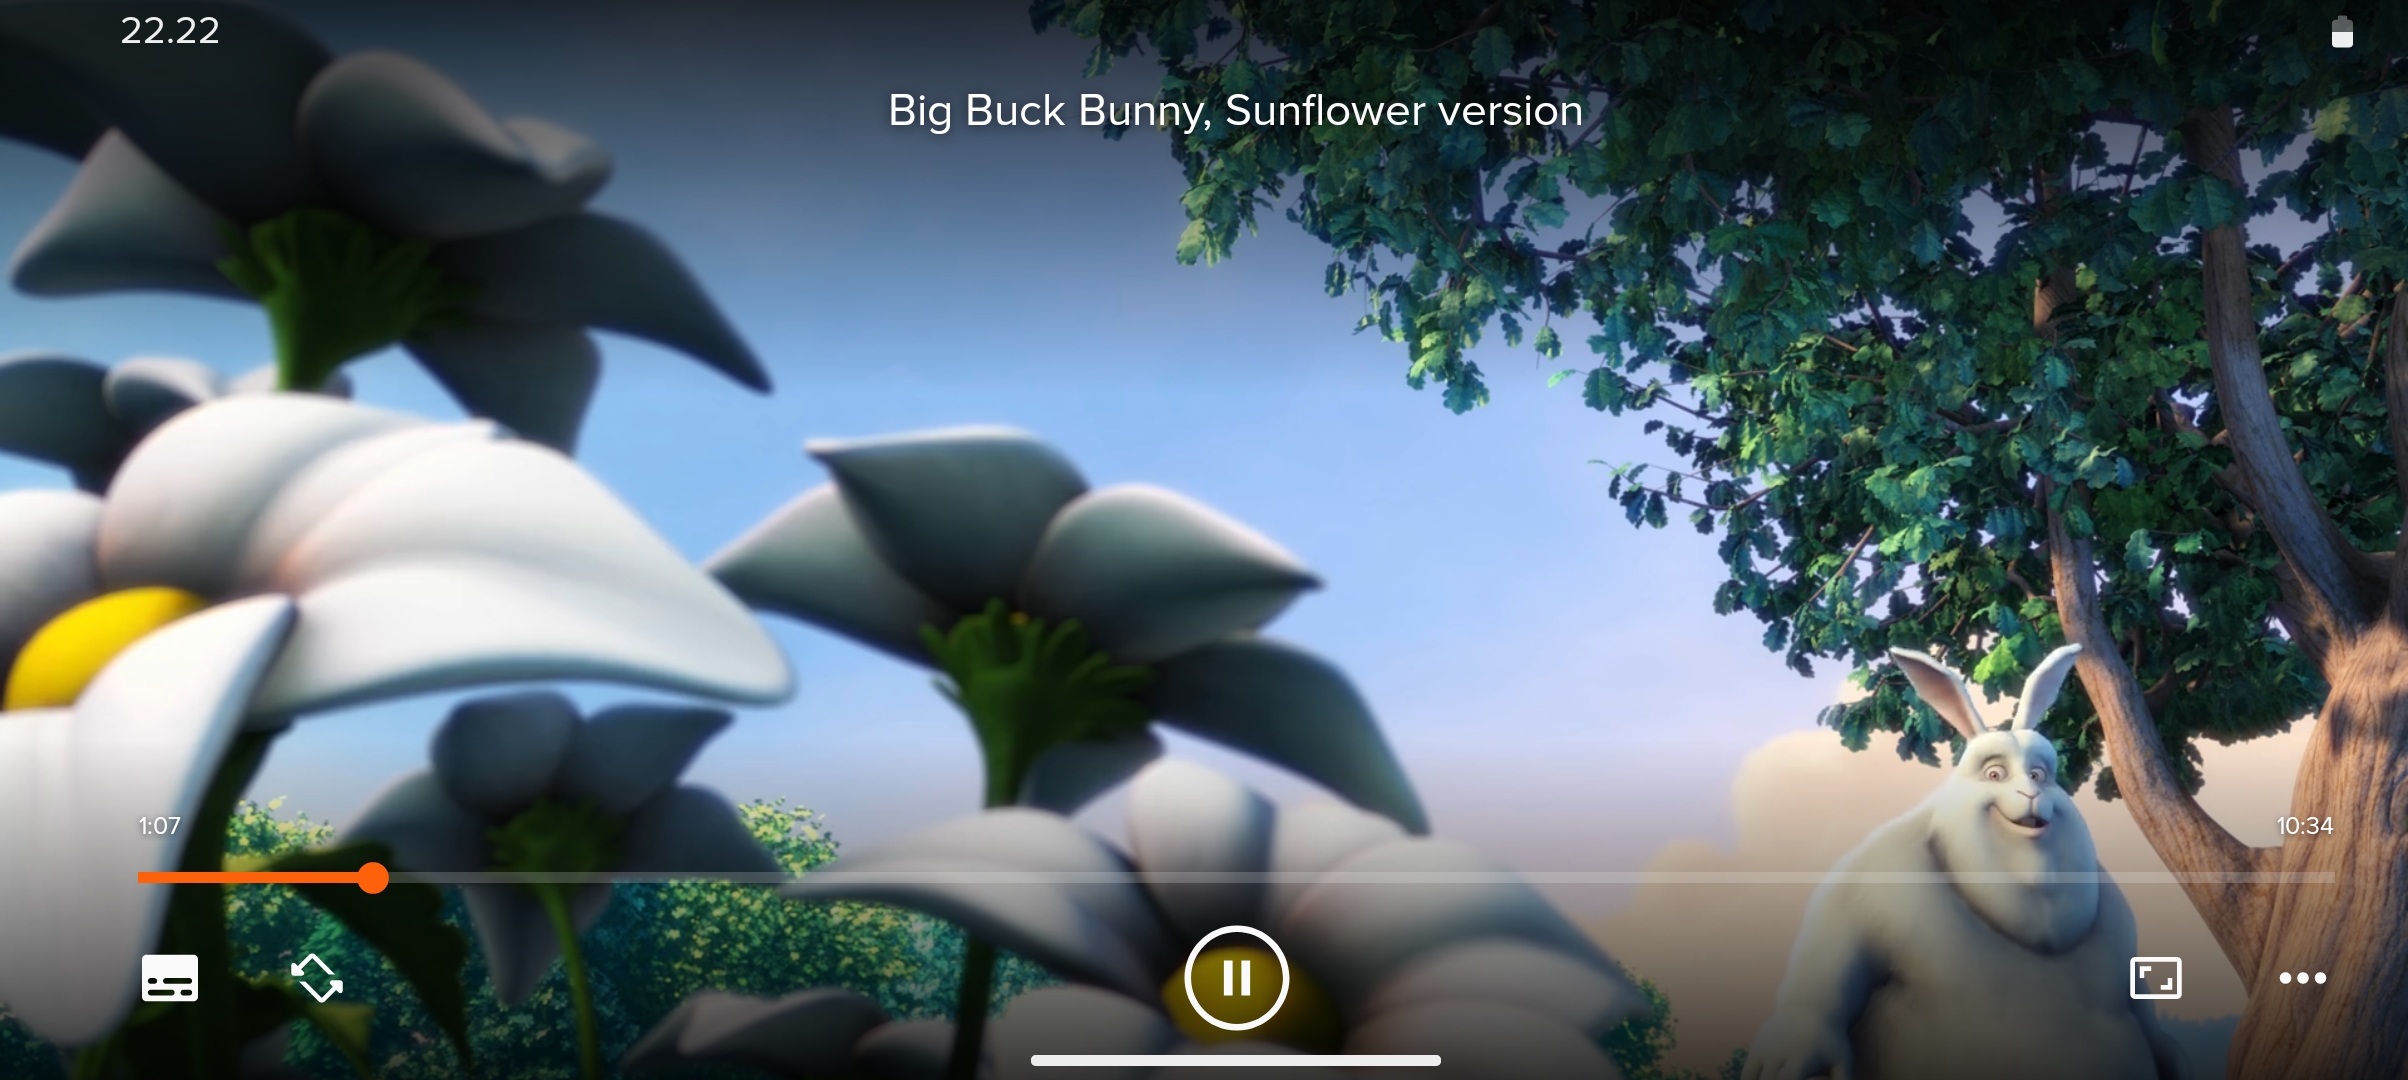 Screenshot of VLC media player on Android